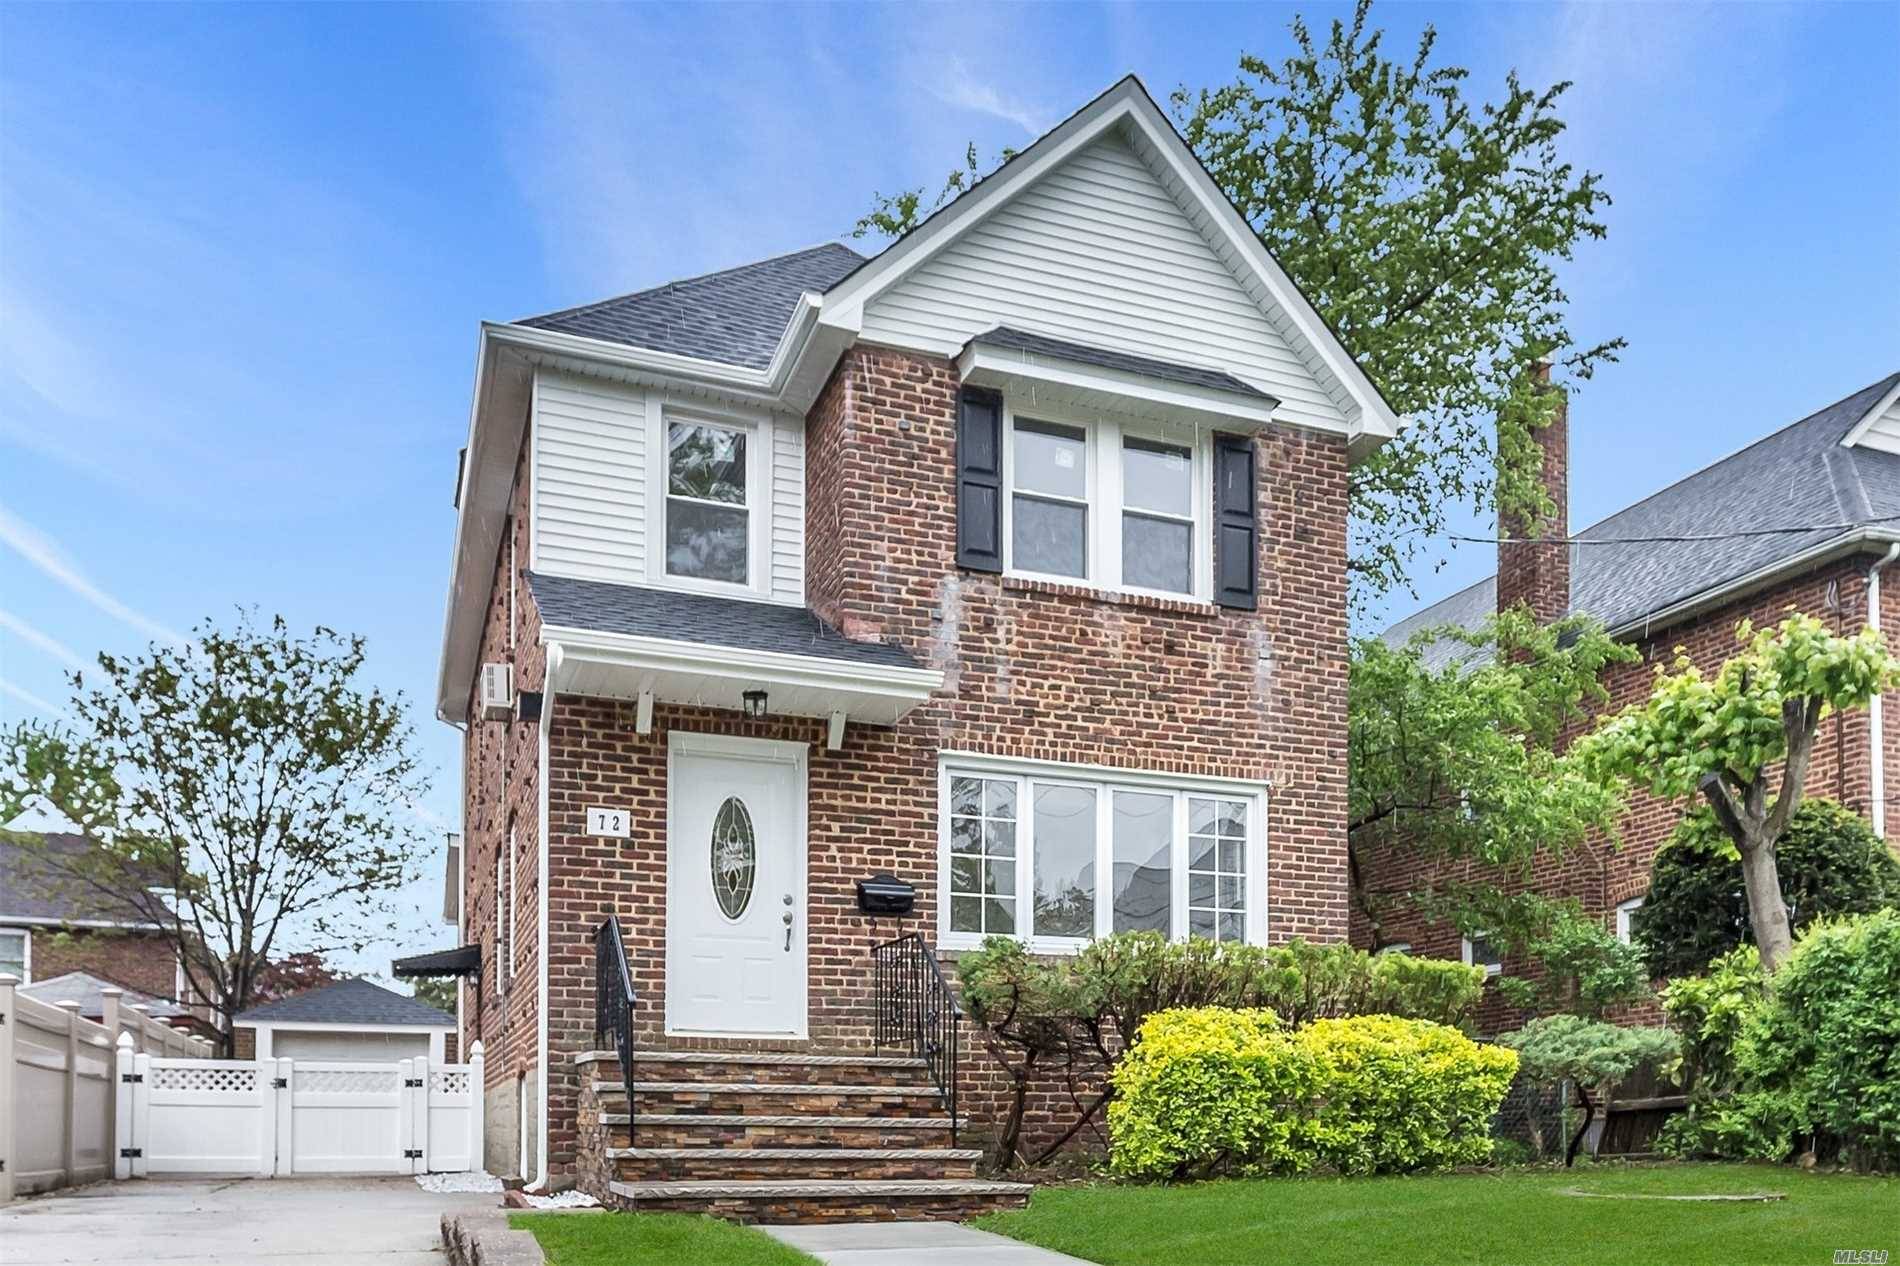 Completely Renovated 4Br Brick Colonial Inside & Out.